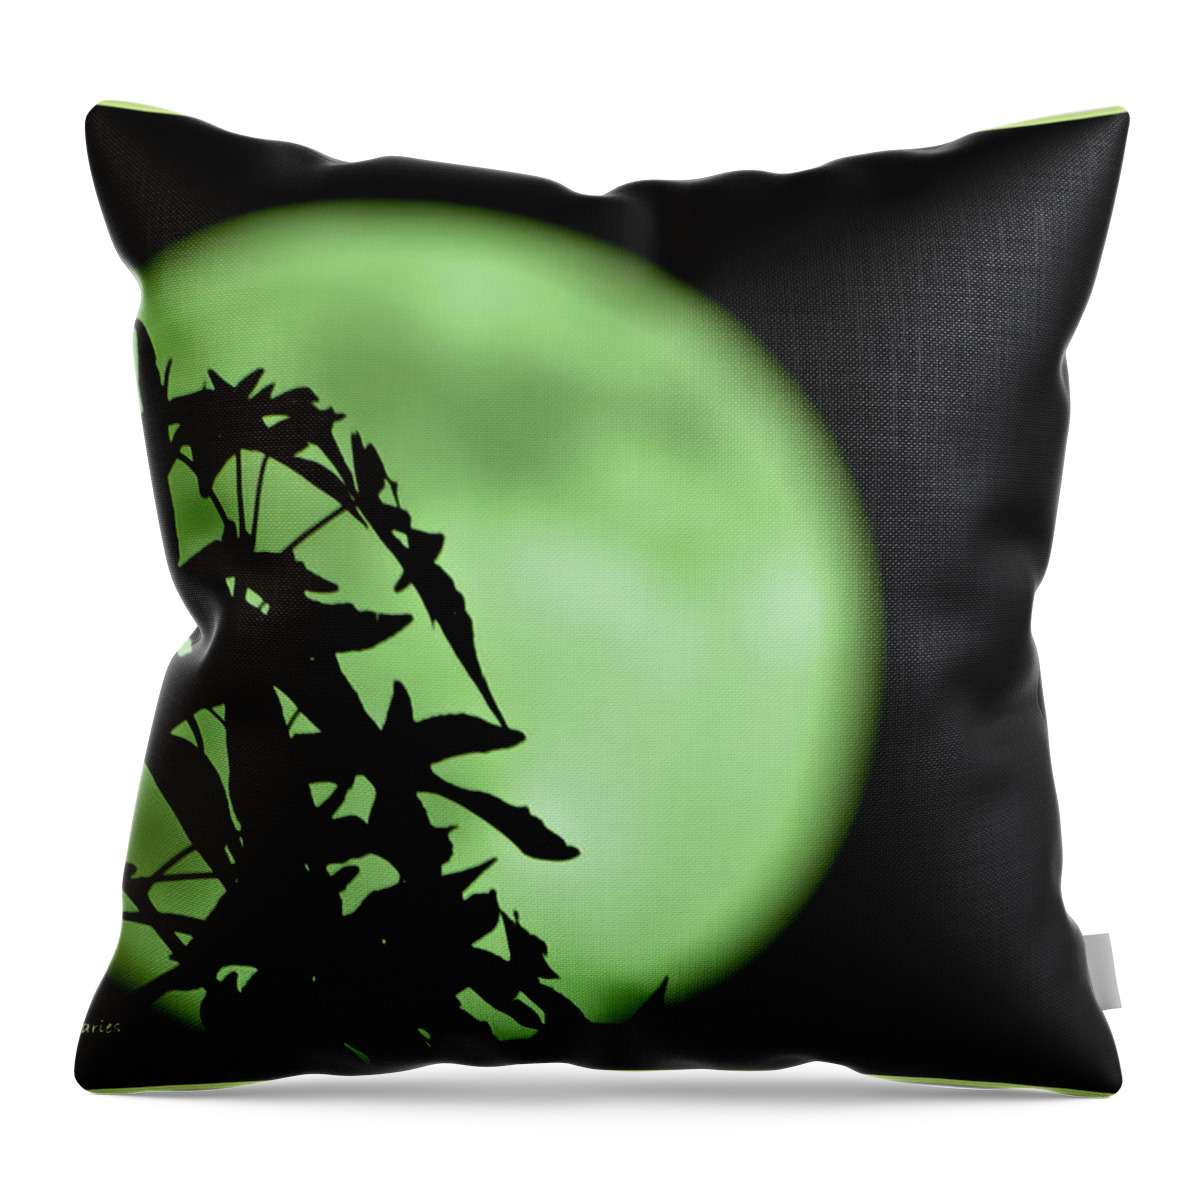 Moon Throw Pillow featuring the photograph Witching Hour by DigiArt Diaries by Vicky B Fuller